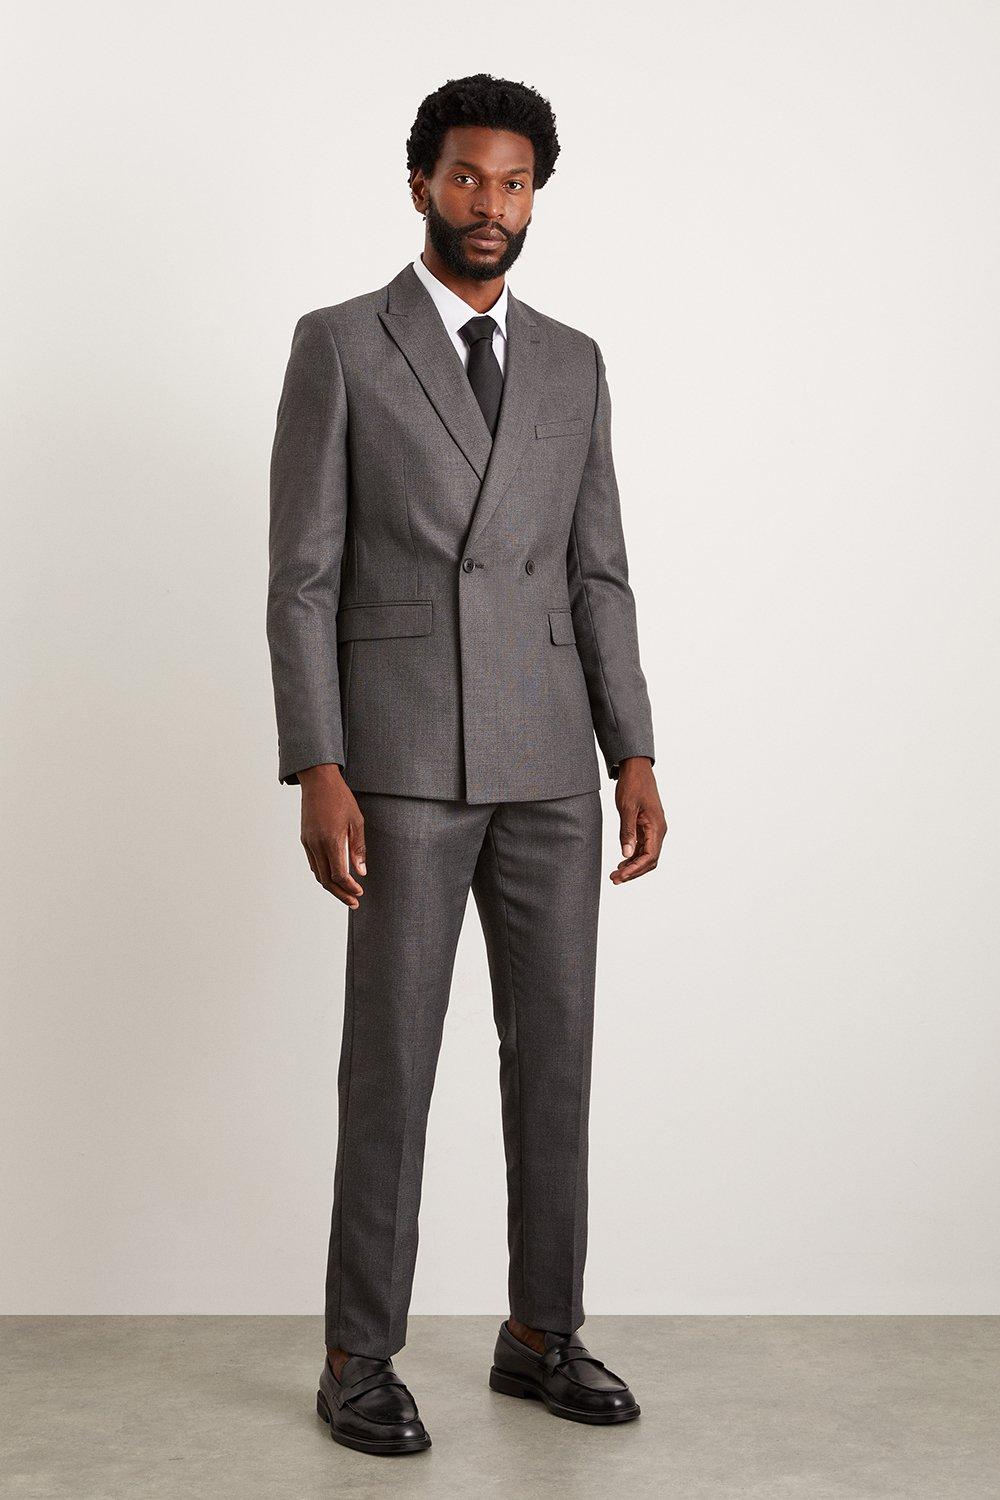 Suits | Double Breasted Charcoal Wide Self Stripe Suit Jacket | Burton